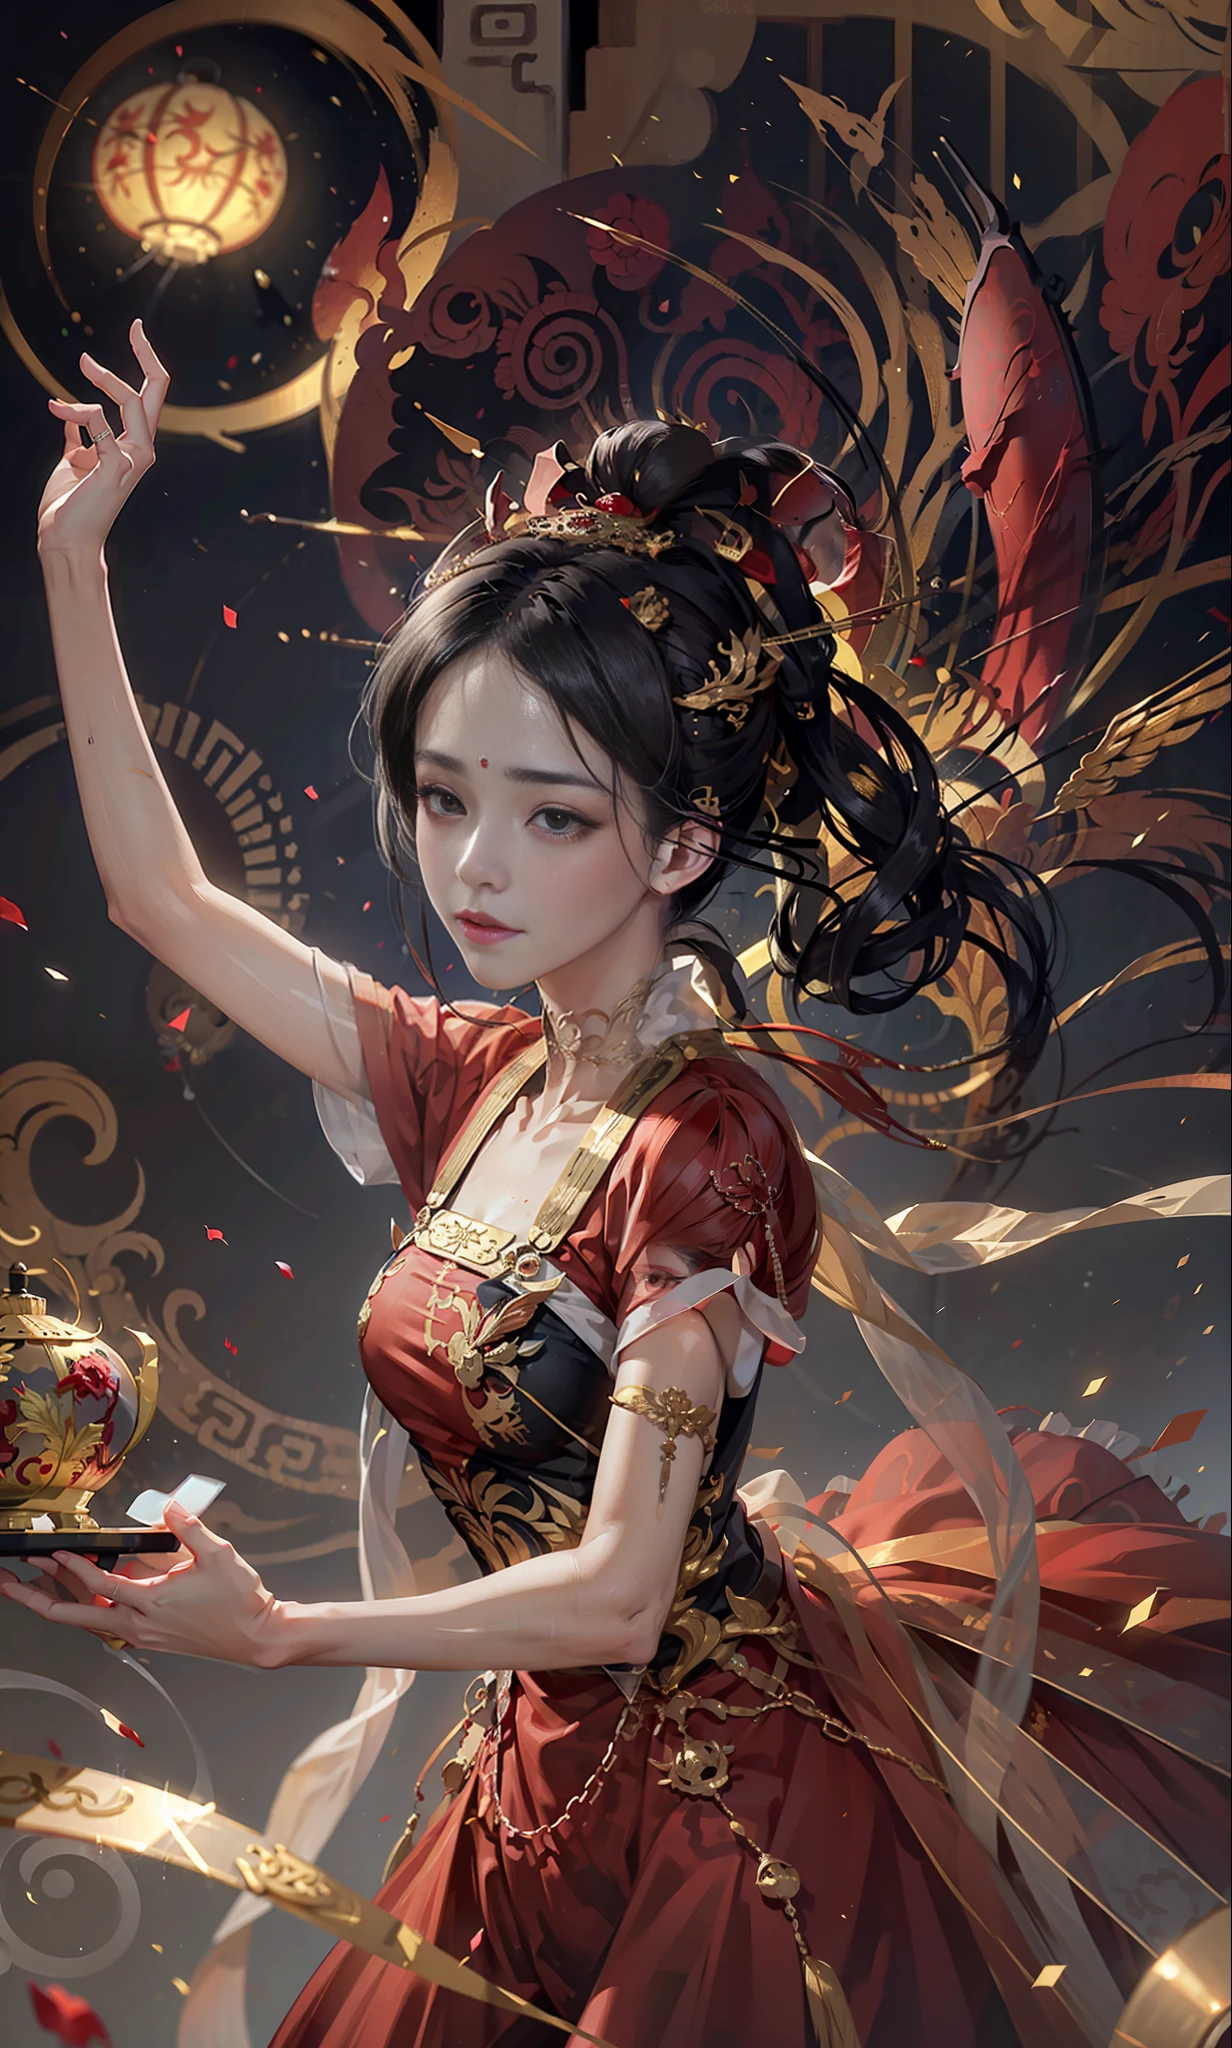 Best Quality, Masterpiece, Ultra Detail, Extreme Detail, 8k Wallpaper, Realistic Details, Movie Lighting, Dynamic Angle, World Mastery Theater, Best Quality, Extremely Delicate Beautiful Girl, Perfect Face, Delicate Facial Features, Perfect Hands, Delicate Eyelashes, Delicate Eyes, Ancient Chinese Hairstyle, Peking Opera, Horror, Spooky Atmosphere, Darkness, Red Lantern, Spirit Rune, Golden Ratio, Messy, Bust, Melancholy Expression, Small Laugh, Red Tears, Rose Petals, Red Candles, Side Look